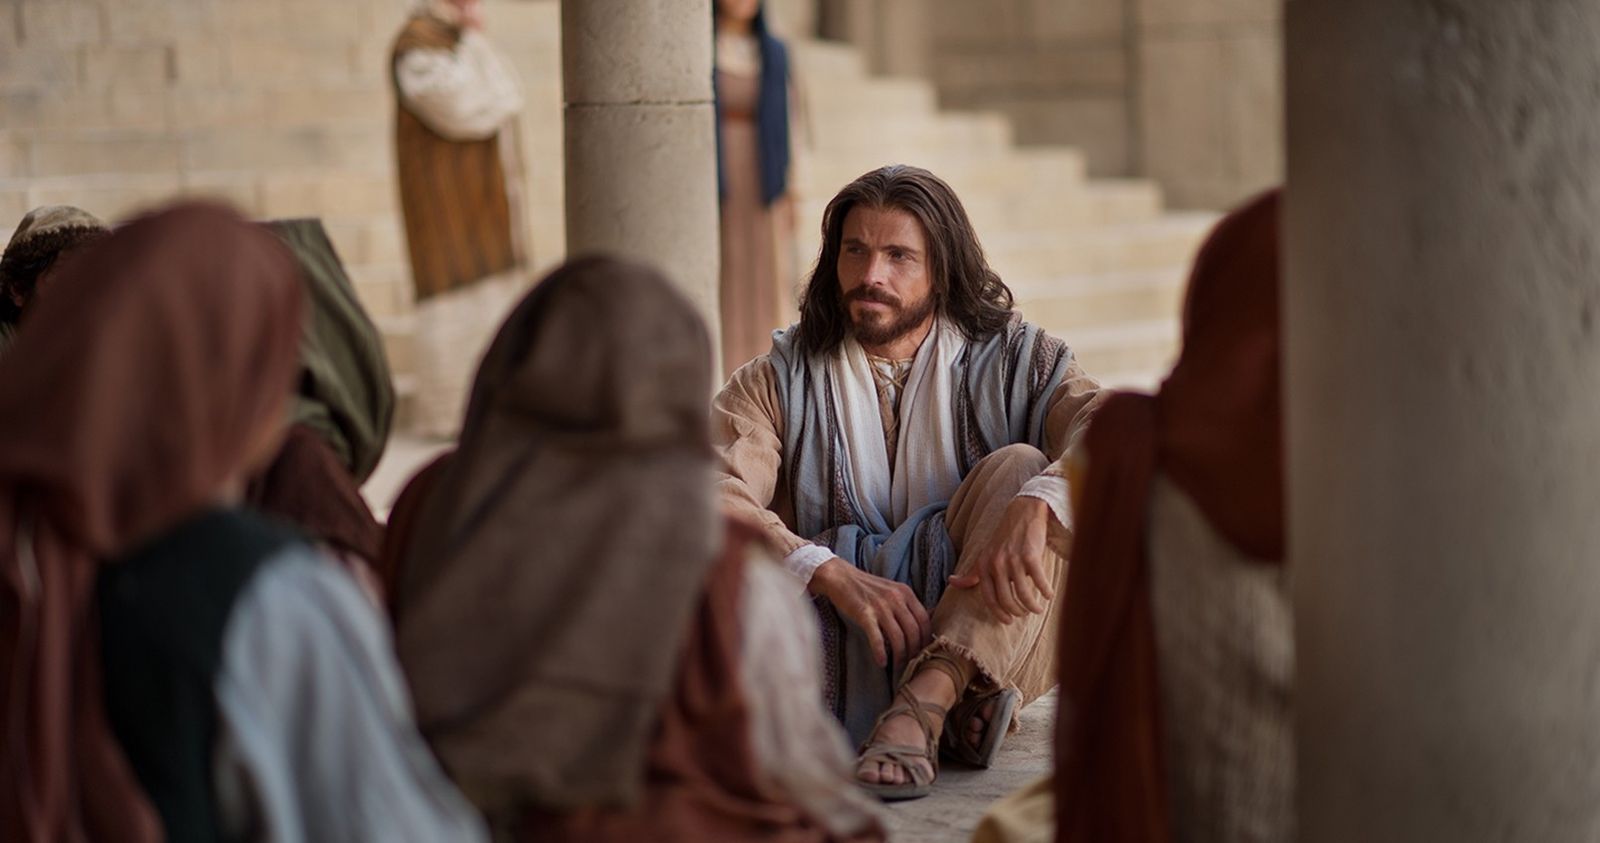 Christ is sitting down on the ground in the temple teaching a group of people.  Outtakes included some more of Jesus teaching, the other outtakes with this image are from a different title: "Jesus Christ. Light of the World" showing Christ after the event of the Woman taken in Adultery and the Jews questioning his authority.